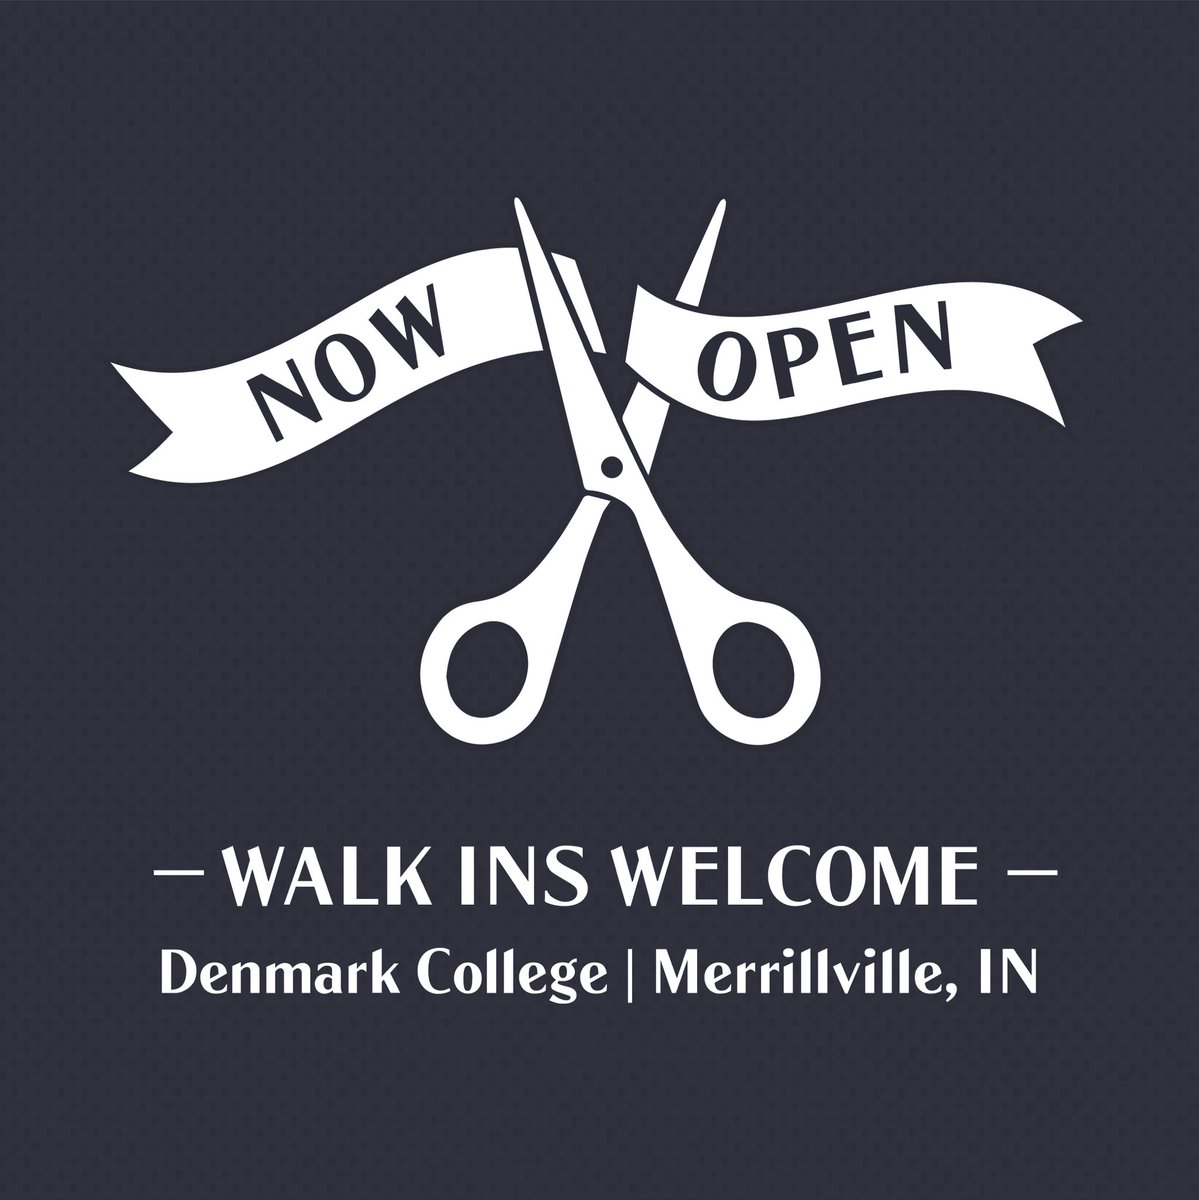 Now accepting clients & walk-ins, Feel free to contact me or come in & see me at Denmark College if you’d like a haircut, razor shave, perm, facial or scalp treatment. 💈#barberstudent #barber #andismaster #straightrazor